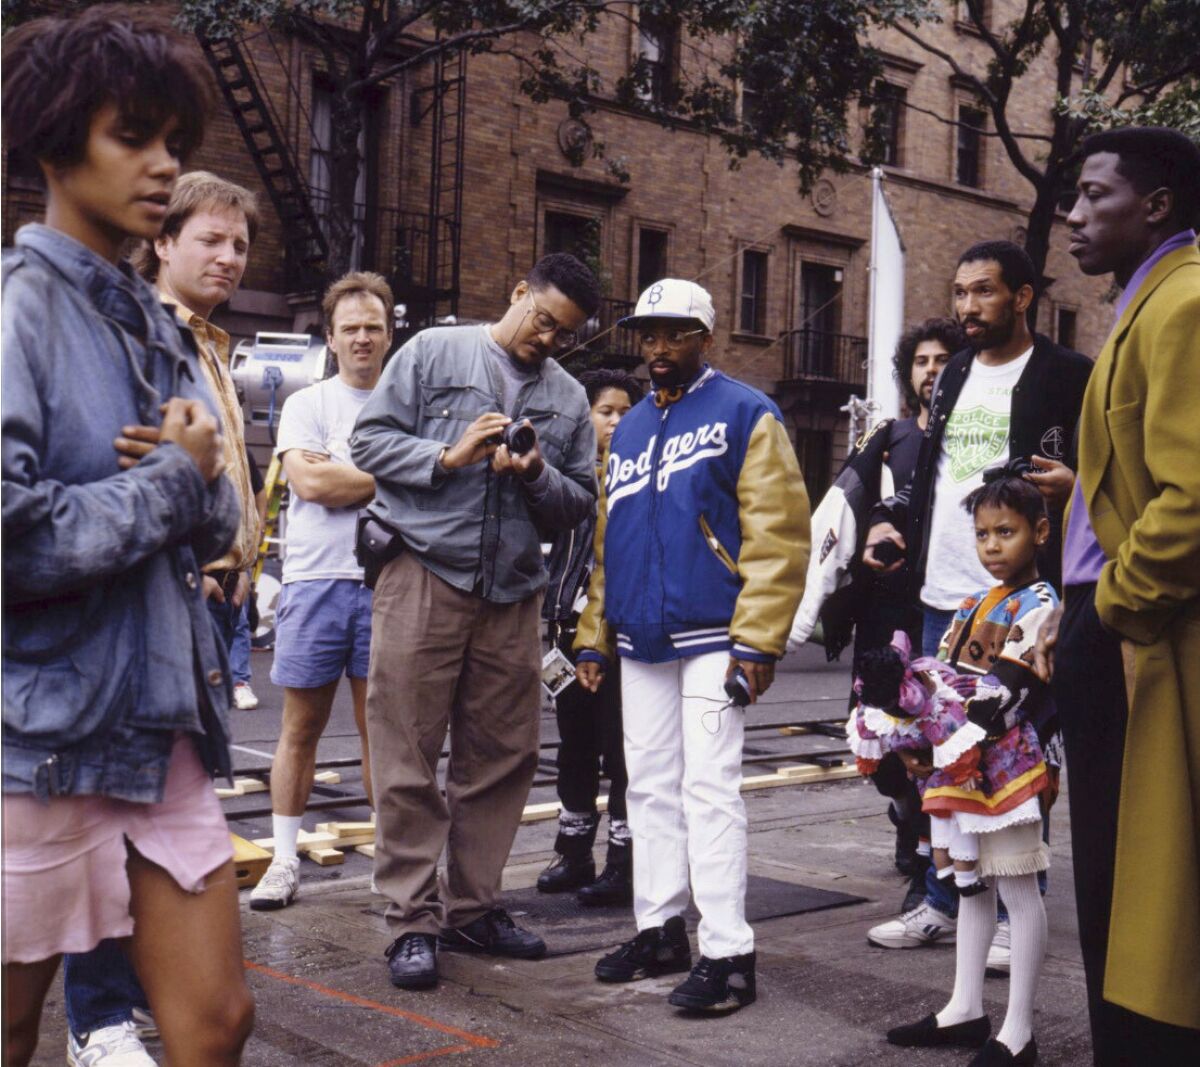 Filmmaker Spike Lee, center right, appears with his brother David Lee, center left, with castmembers, including Halle Berry, left, and Wesley Snipes, right, on the set of the 1991 film, "Jungle Fever." A new photography book spanning Spike's career brings together images shot by David, from the making of "Do the Right Thing" to "Da 5 Bloods." It's an intimate look at the filmmaker, as seen through his brother's lens. (Universal Pictures via AP)